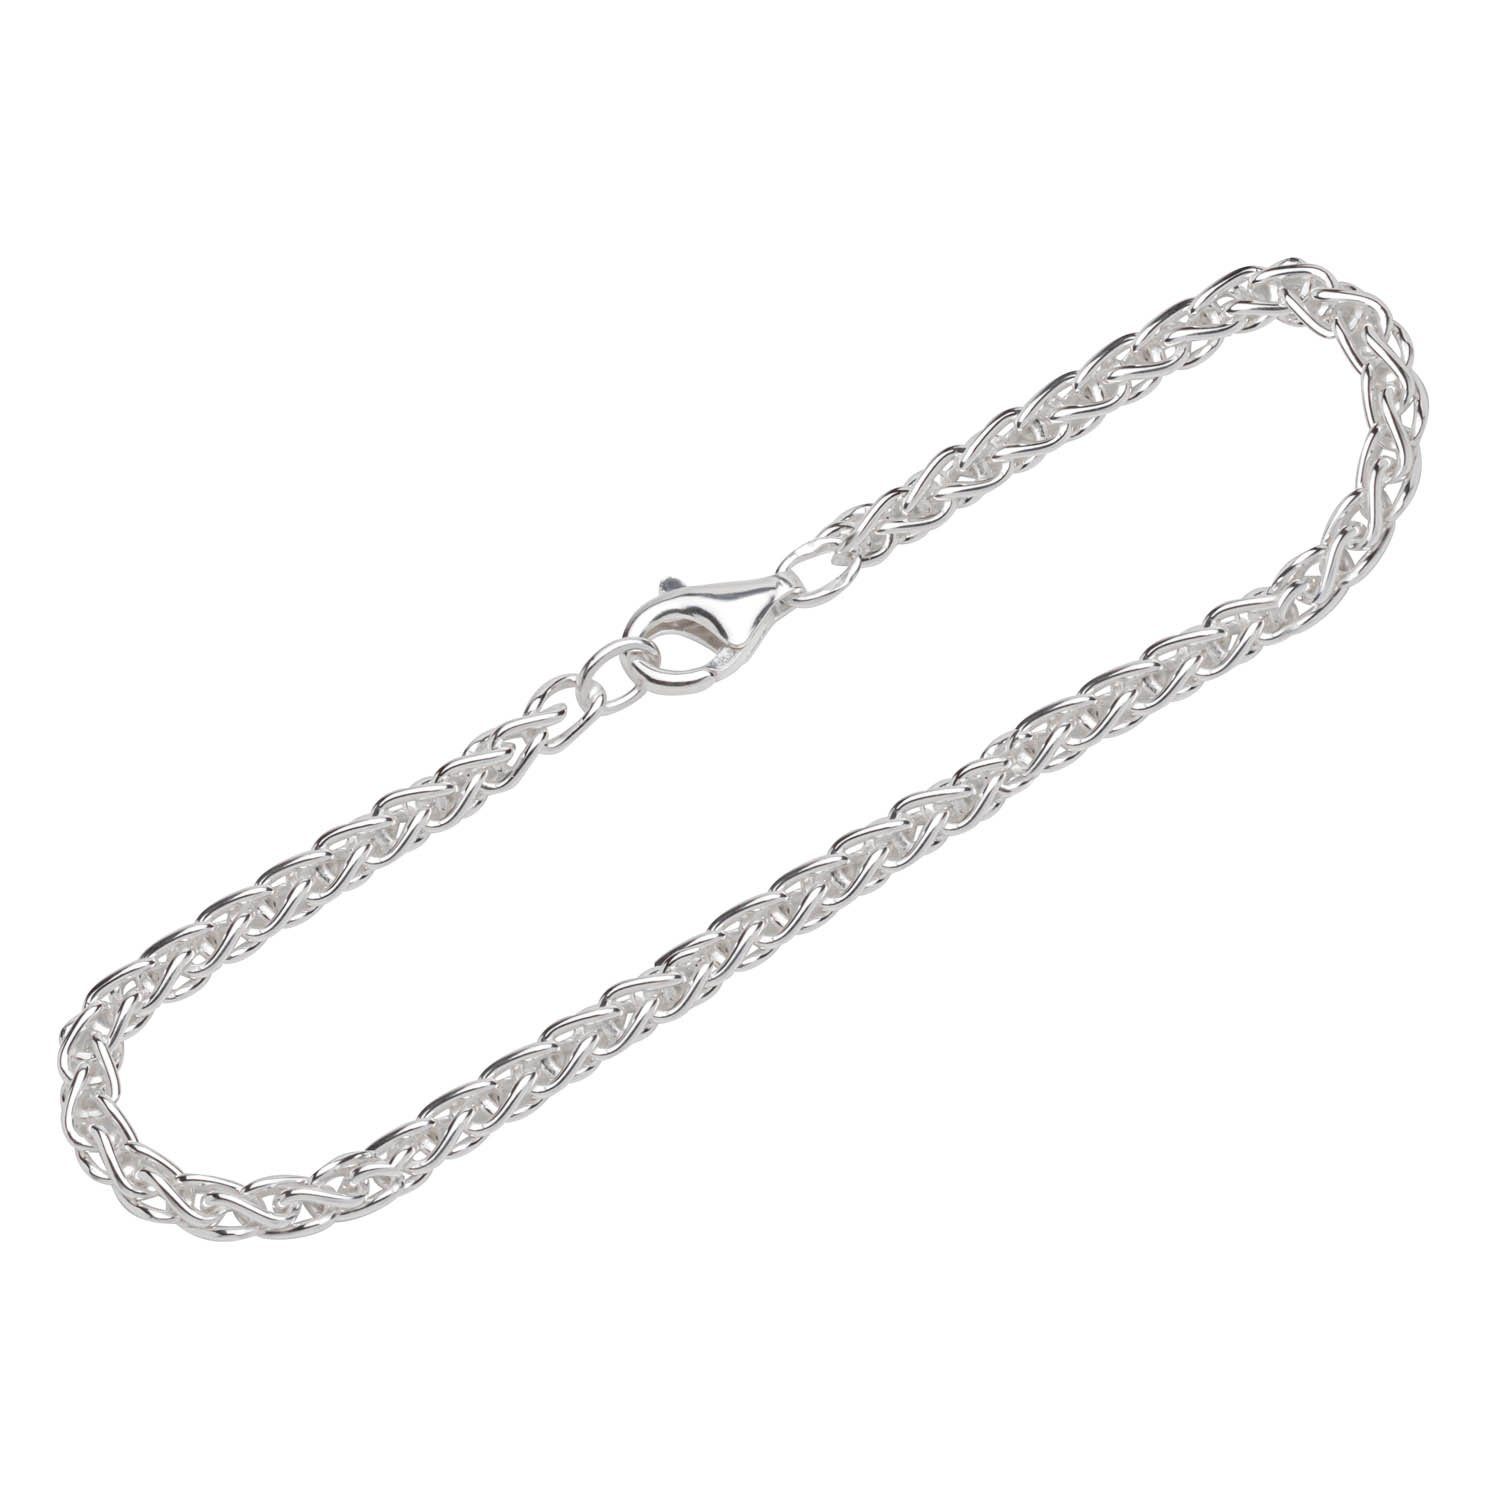 NKlaus Silberarmband Armband 925 Sterling Silber 19cm doppel Zopfkette (1 Stück), Made in Germany